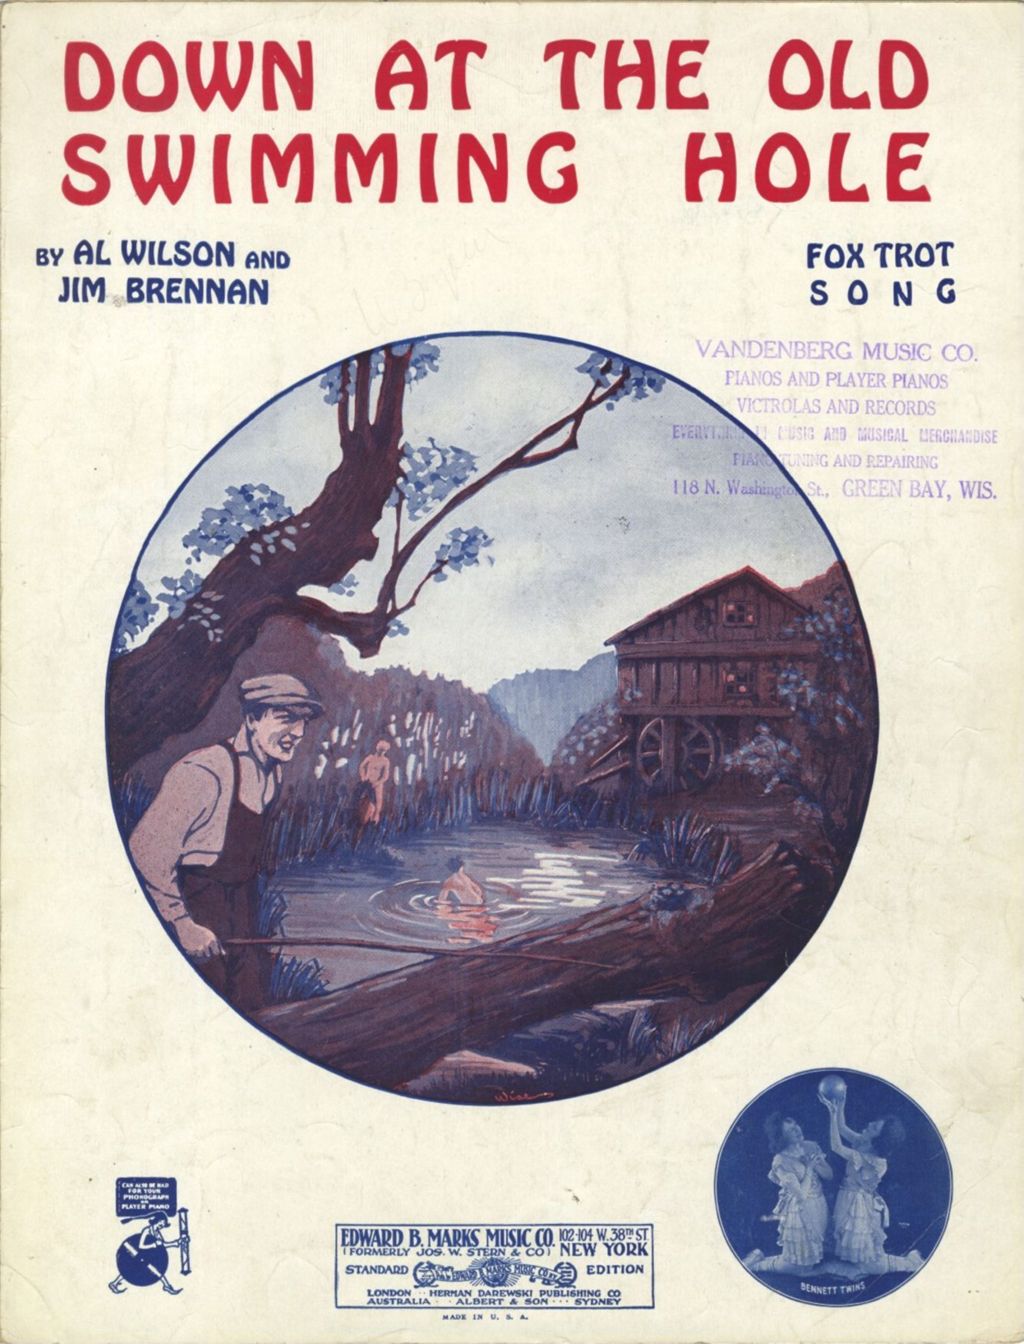 Miniature of Down at the Old Swimming Hole